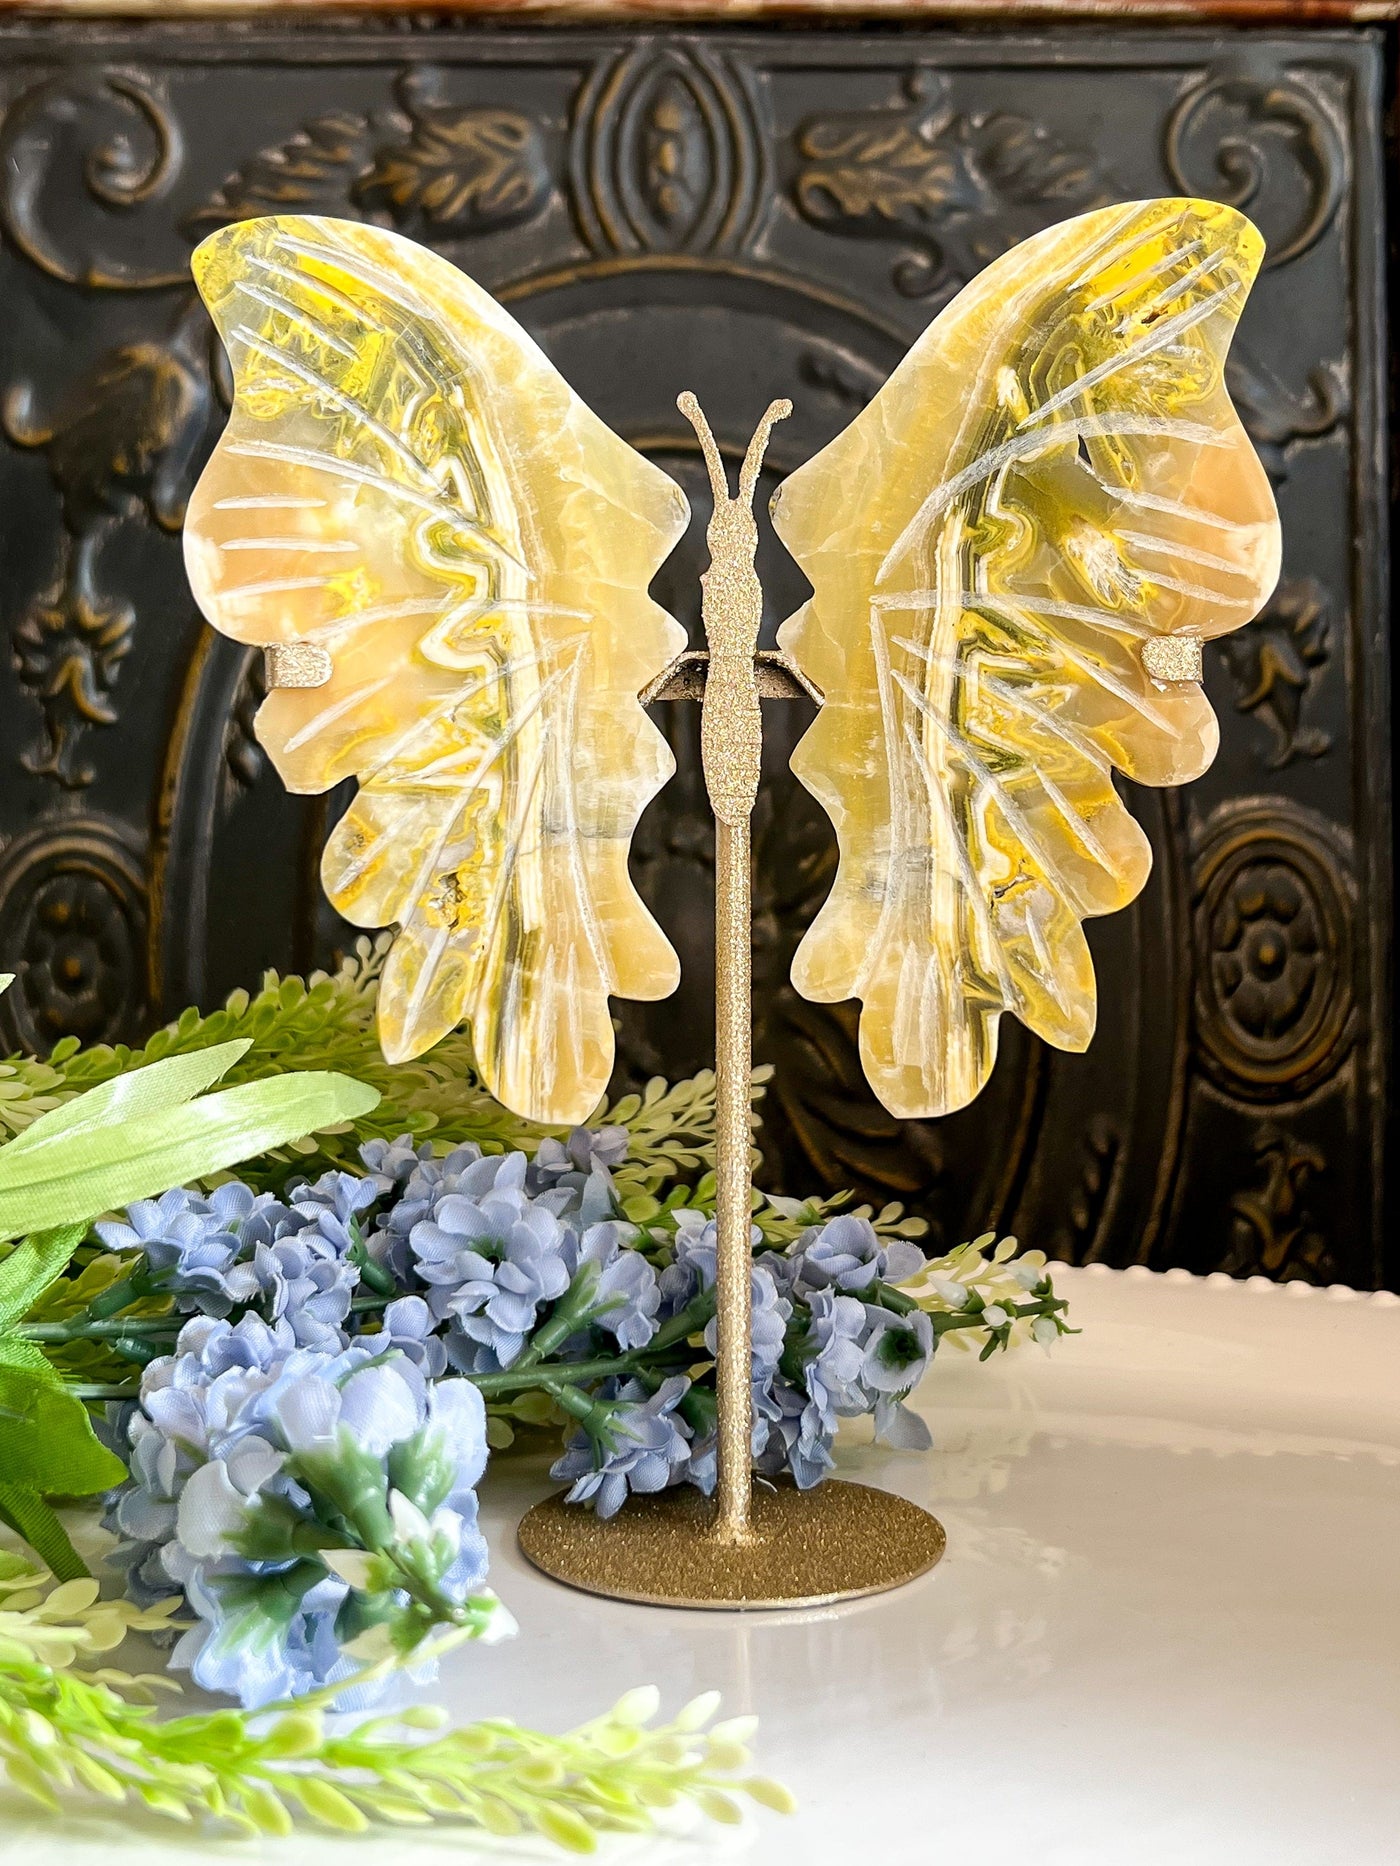 BUMBLEBEE JASPER BUTTERFLY WINGS Revive In Style Vintage Furniture Painted Refinished Redesign Beautiful One of a Kind Artistic Antique Unique Home Decor Interior Design French Country Shabby Chic Cottage Farmhouse Grandmillenial Coastal Chalk Paint Metallic Glam Eclectic Quality Dovetailed Rustic Furniture Painter Pinterest Bedroom Living Room Entryway Kitchen Home Trends House Styles Decorating ideas